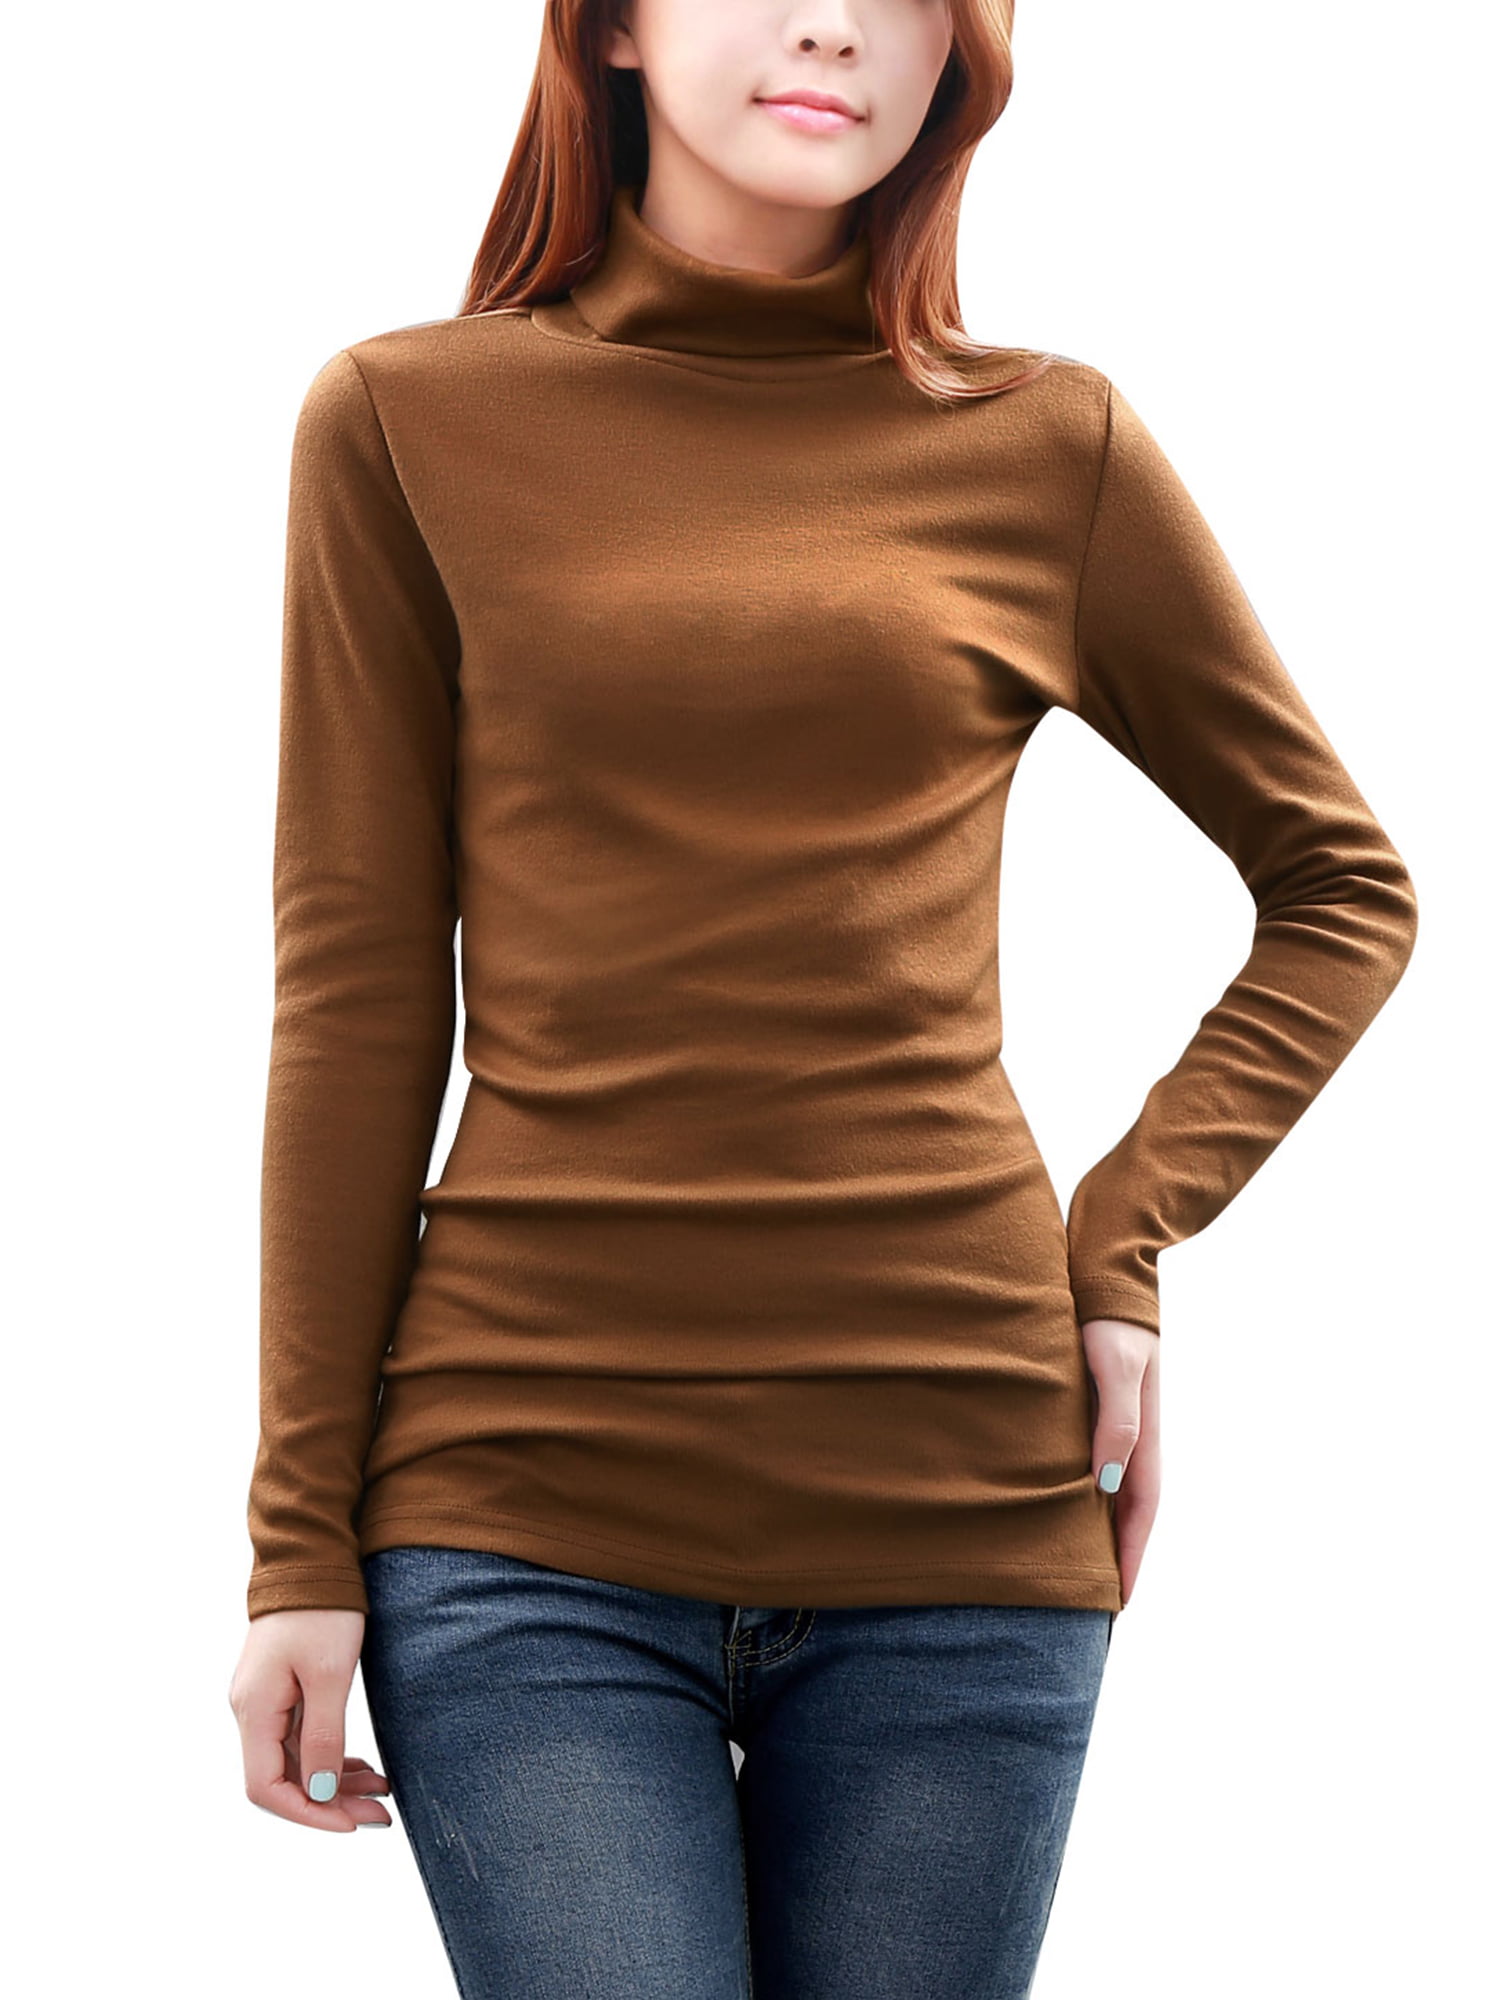 S-XXL CILKOO Womens Turtleneck Sweaters Button Long Sleeve Lightweight Loose Pullover Knitted Jumpers Tops